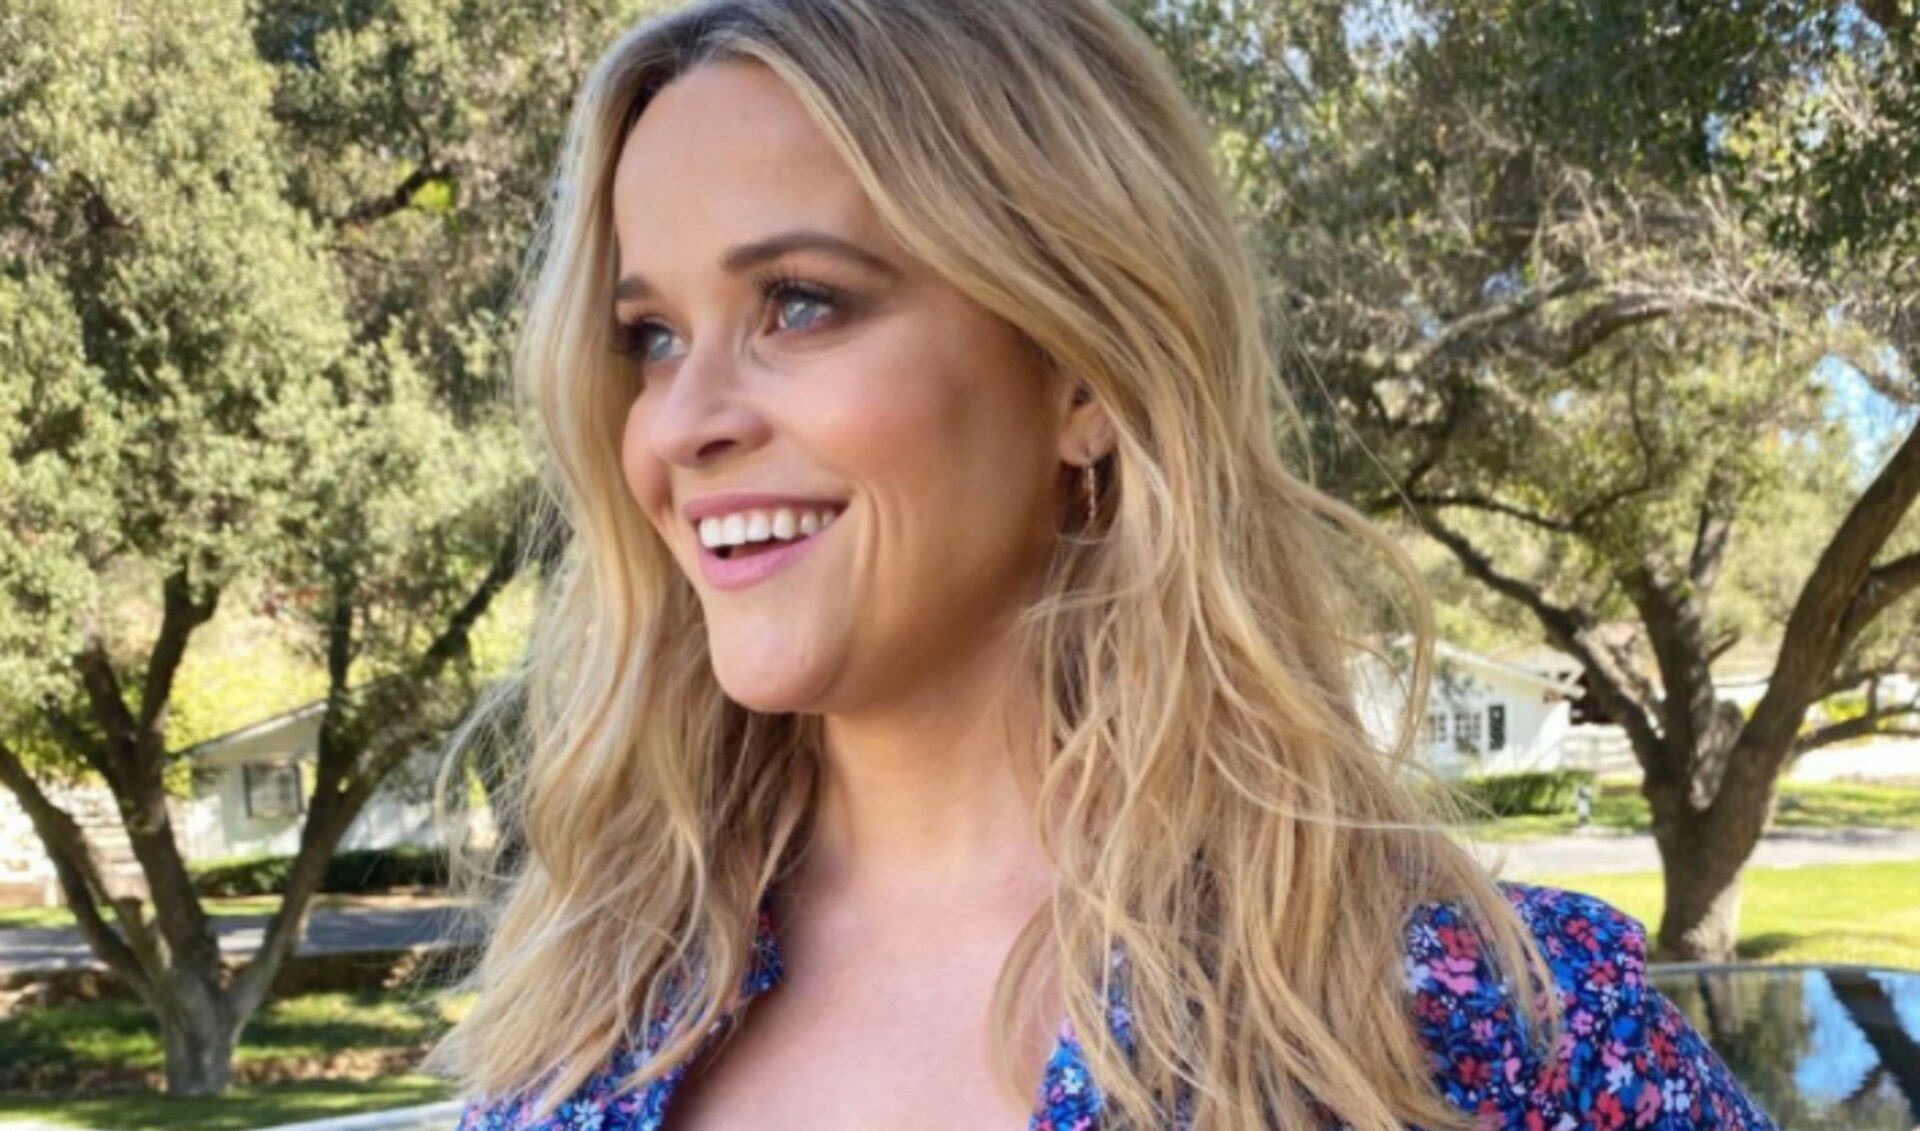 Reese Witherspoon’s Hello Sunshine Bought By Blackstone-Backed Media Firm For $900 Million